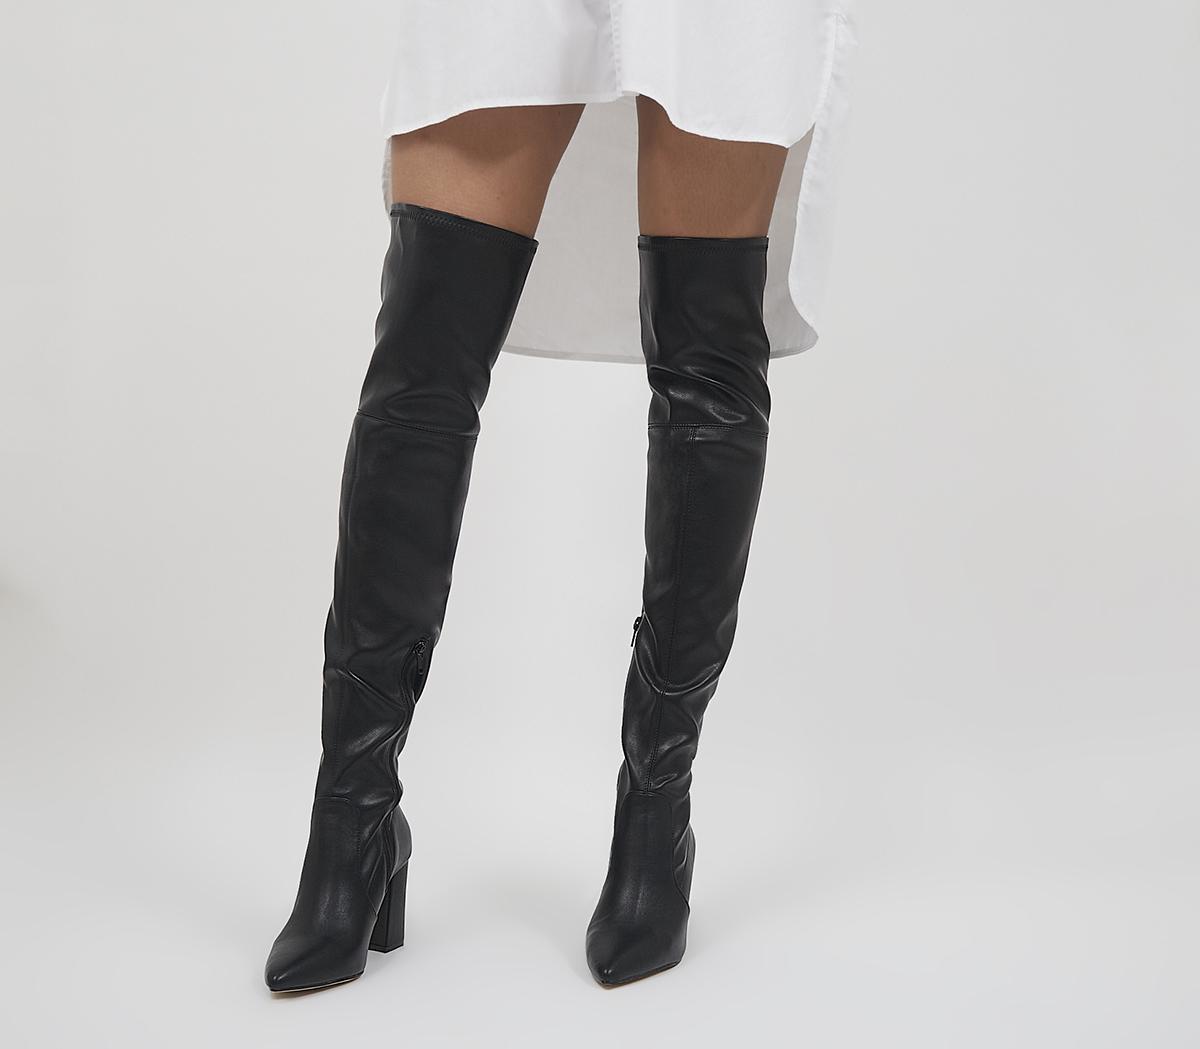 OfficeKlass Stretch Over The Knee BootsBlack